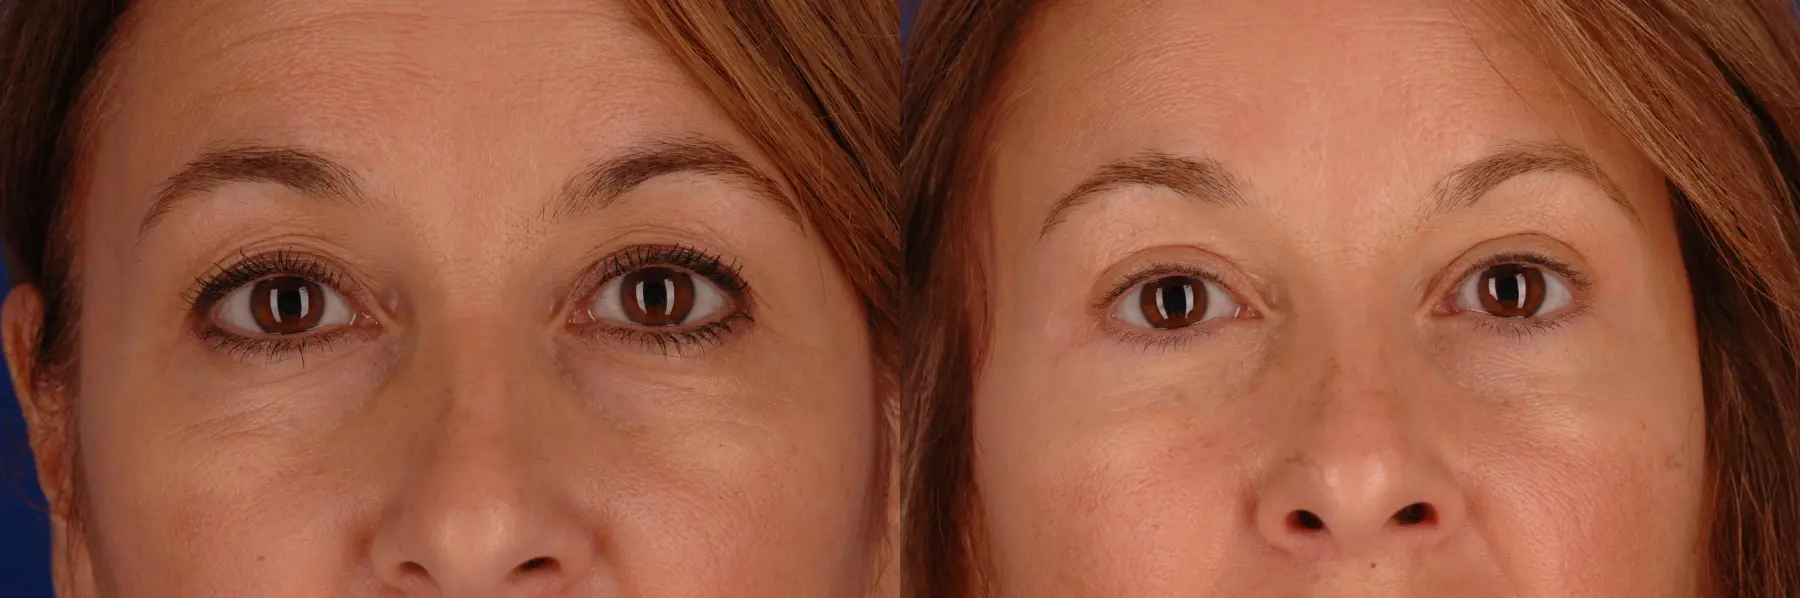 Eyelid Lift Lake Shore Dr, Chicago 2338 - Before and After